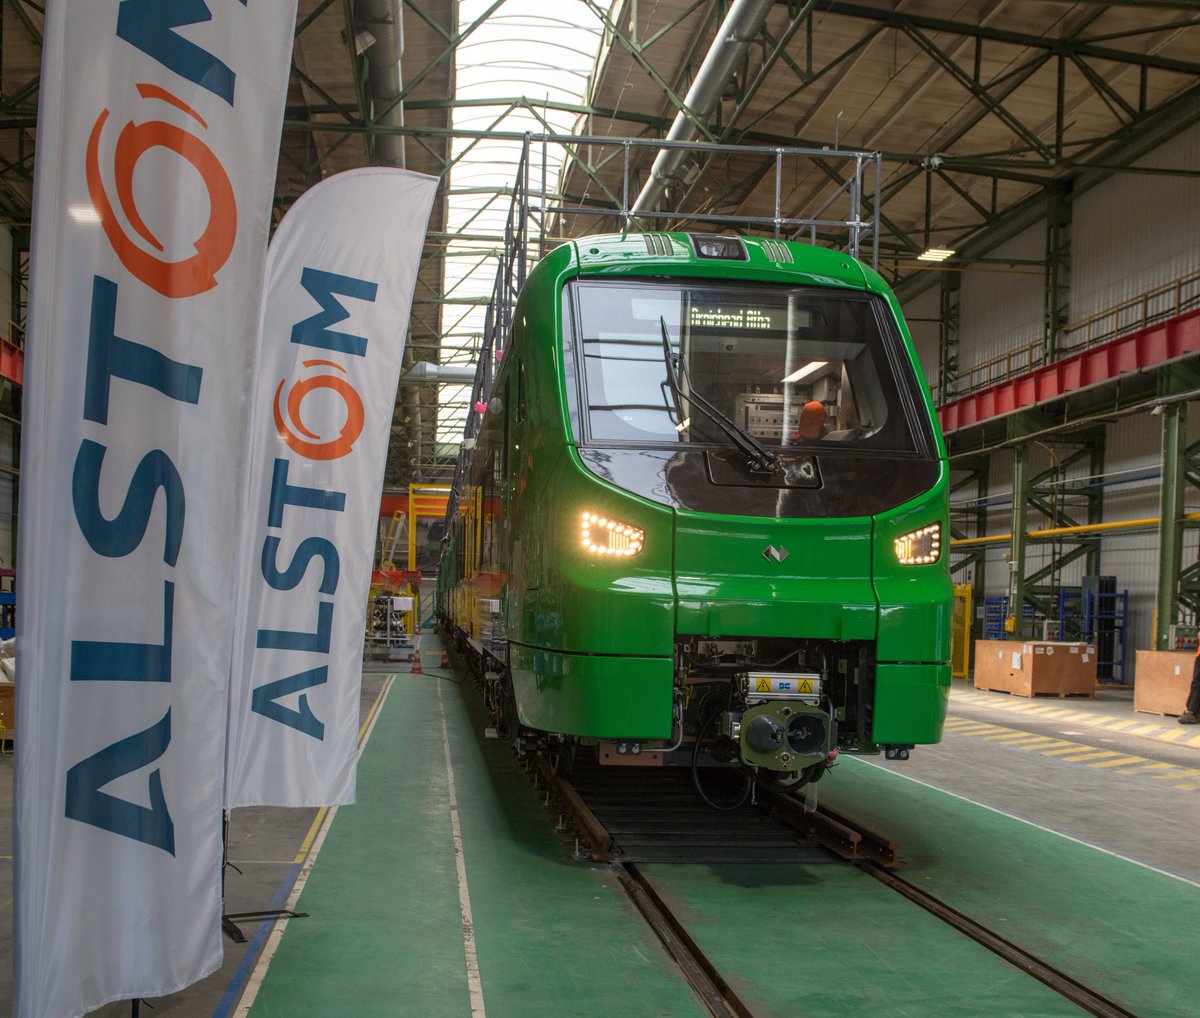 We invited journalists and stakeholders to our site in Katowice, Southern Poland for a sneak peek of our new X'trapolis DART+ fleet for @IrishRail this week. Check out @liamnolanRTE's report for @rtenews from the factory: youtu.be/dUjuJKqm4bU